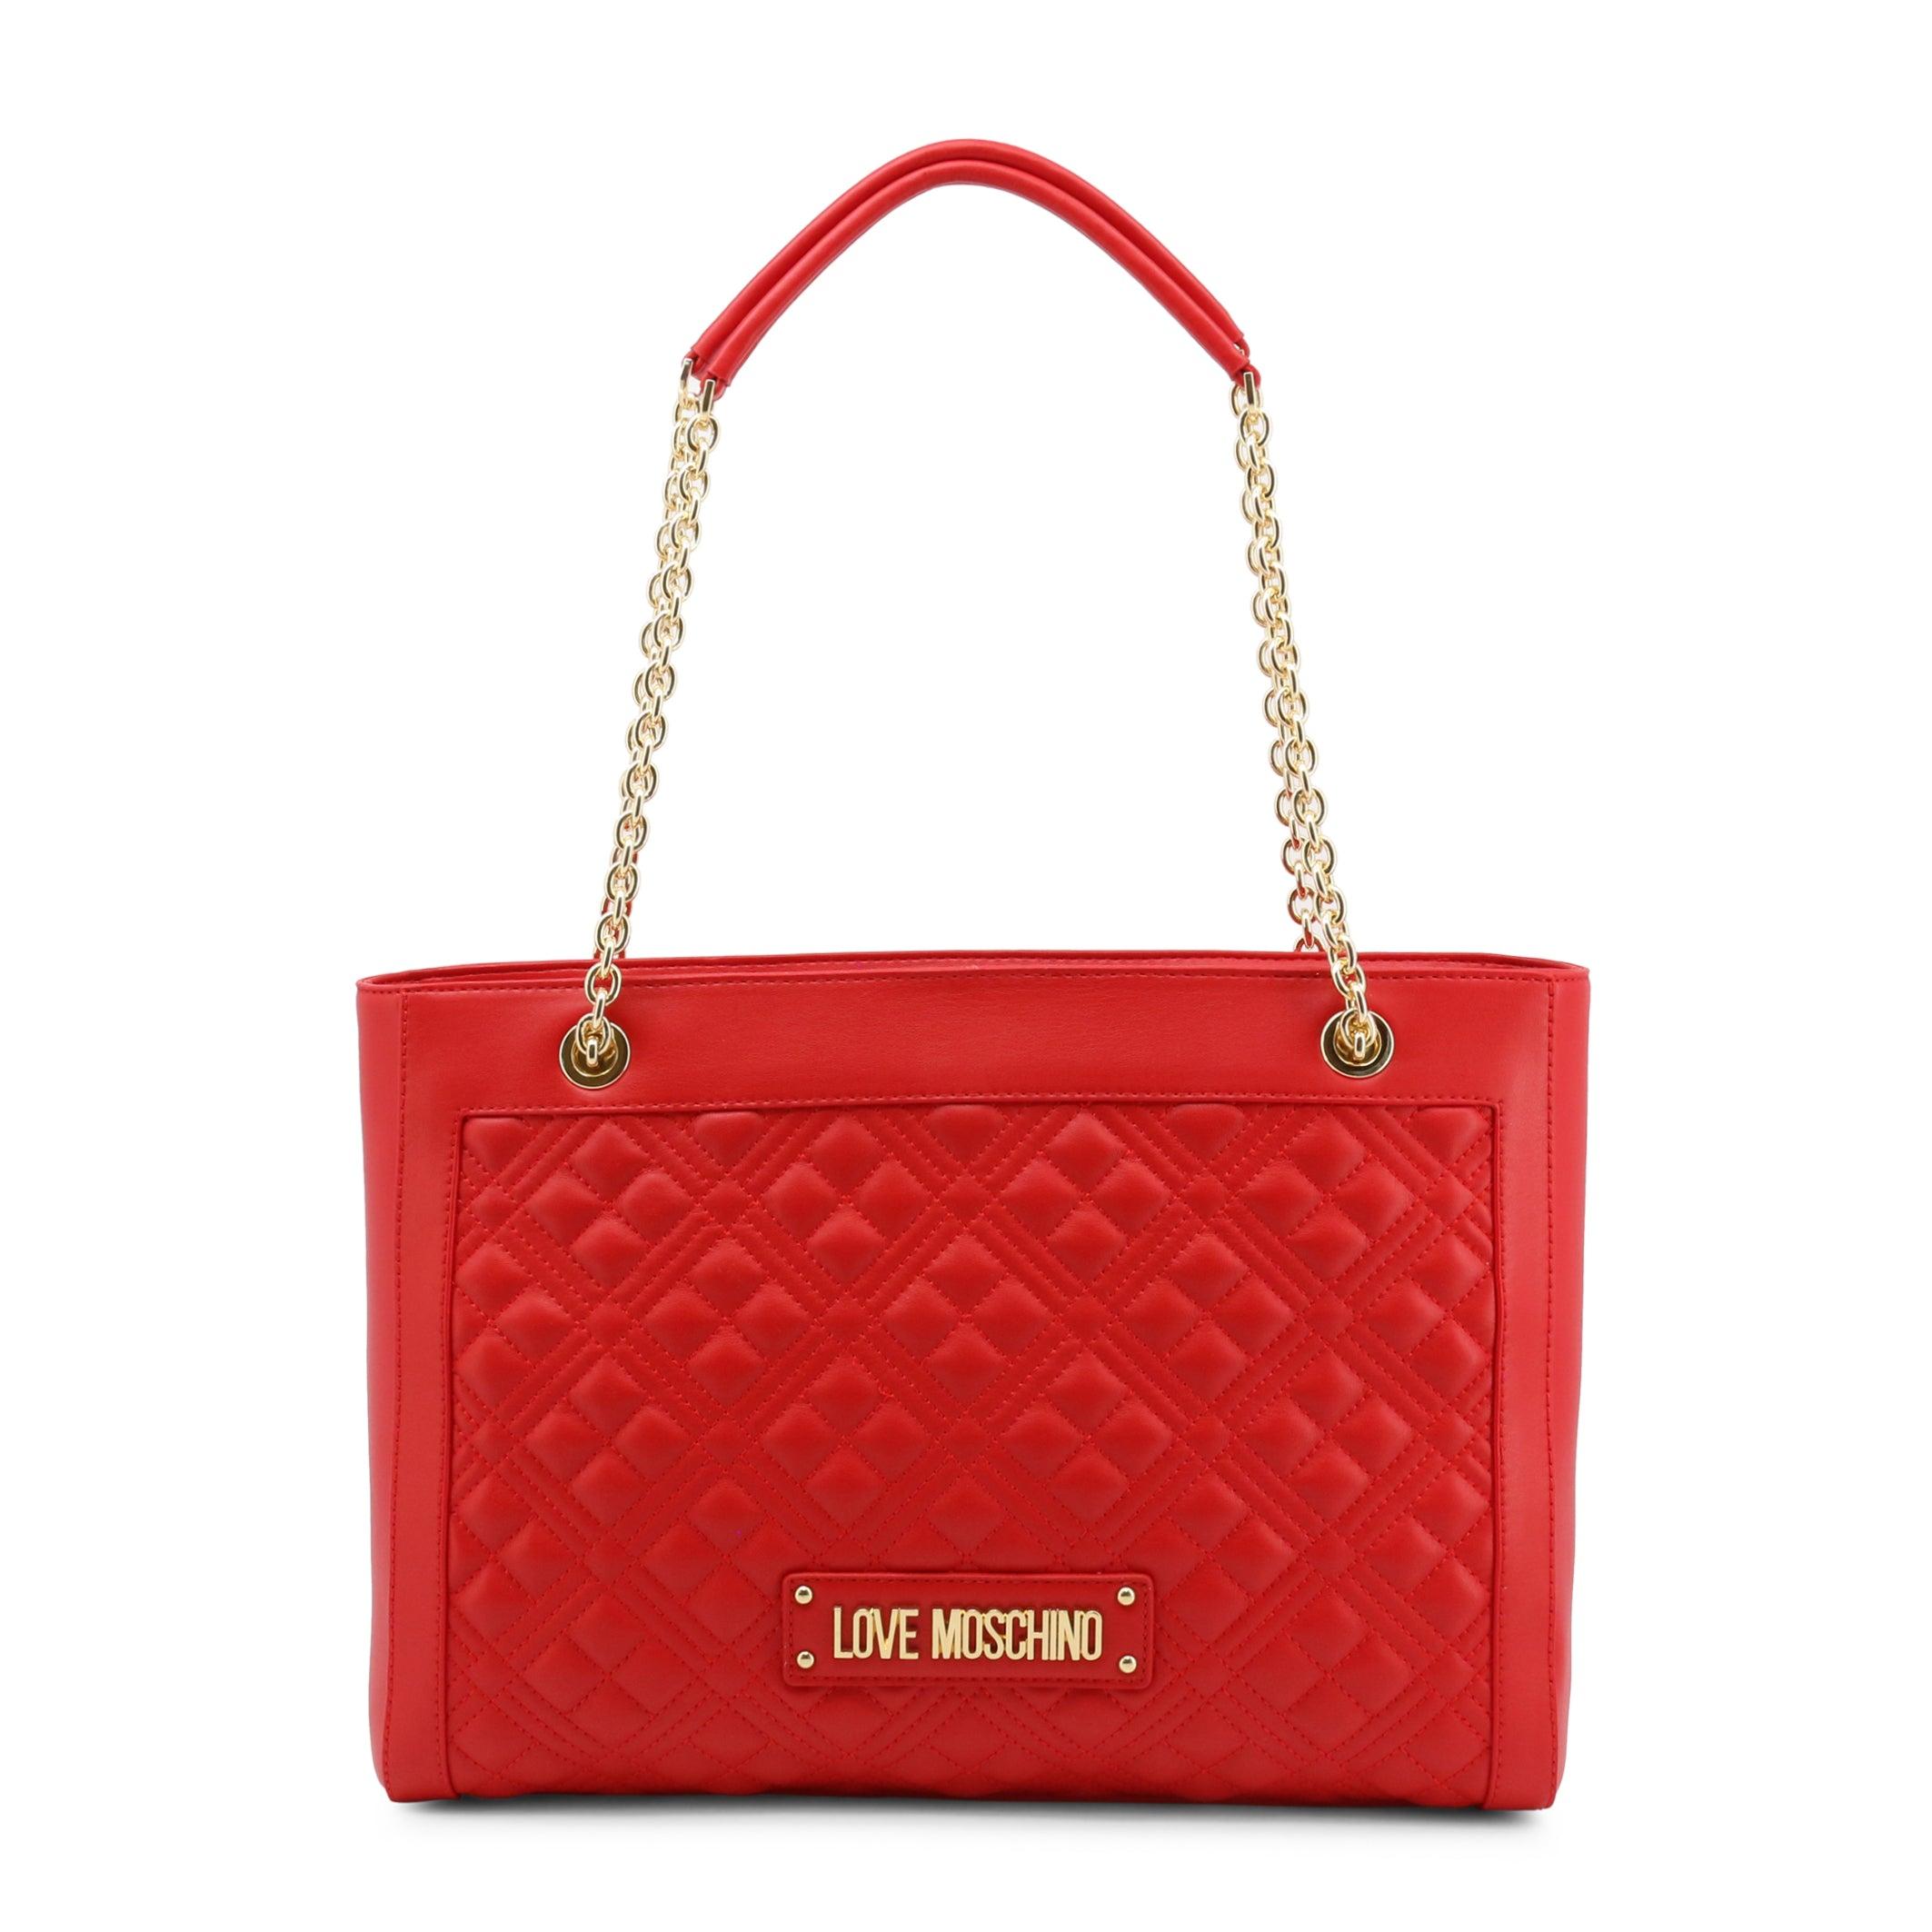 Leather Shoulder Bag LOVE MOSCHINO red Women Bags Love Moschino Women Leather Bags Love Moschino Women Leather Shoulder Bags Love Moschino Women Leather Shoulder Bags Love Moschino Women 